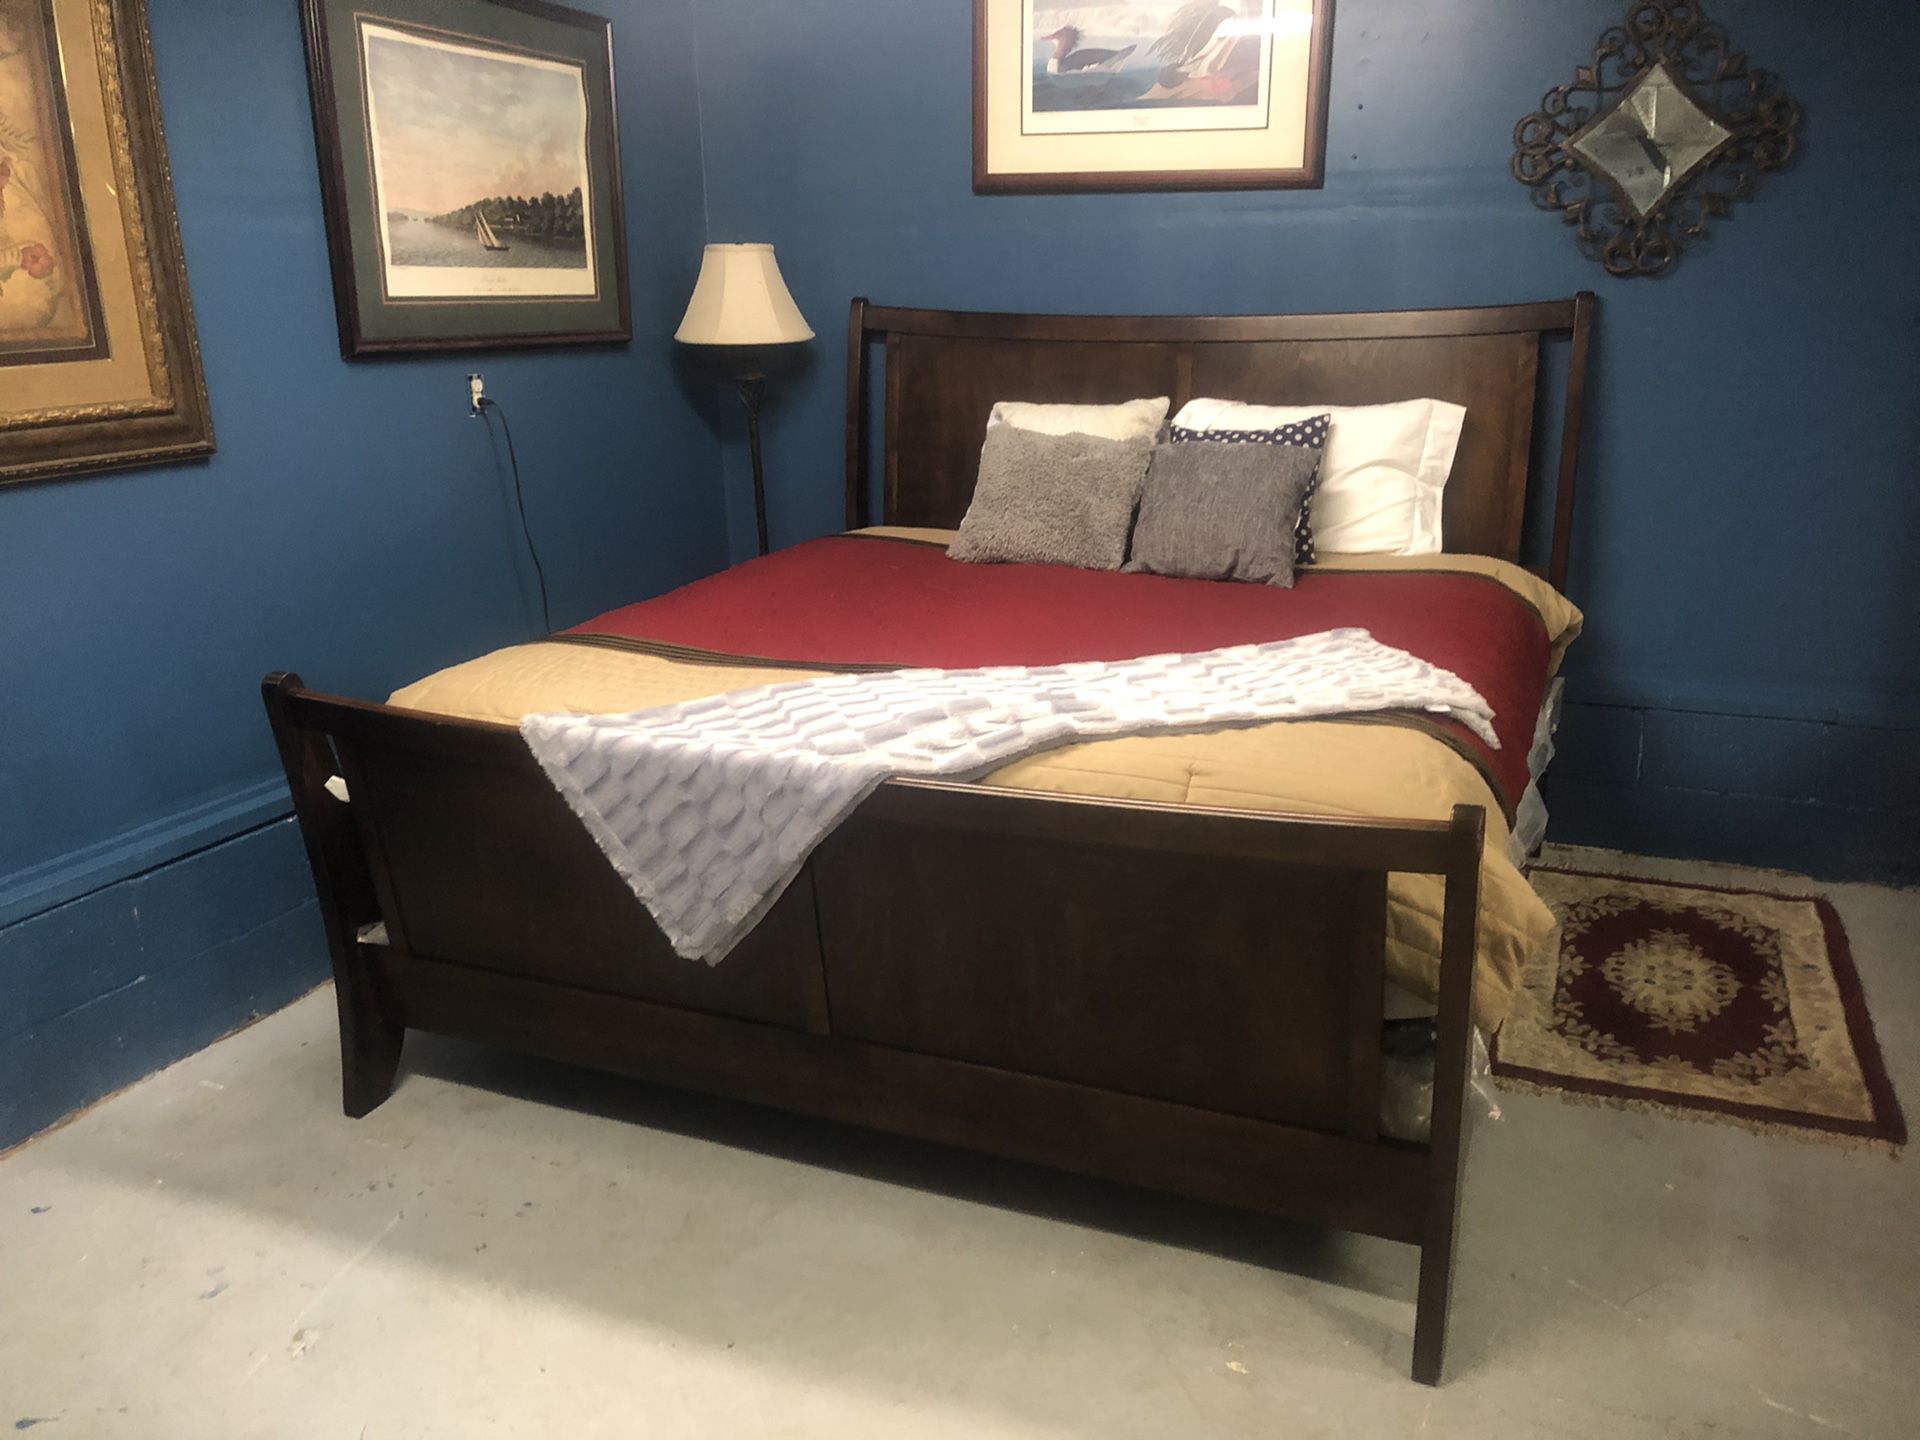 King size bed frame with mattress and box spring